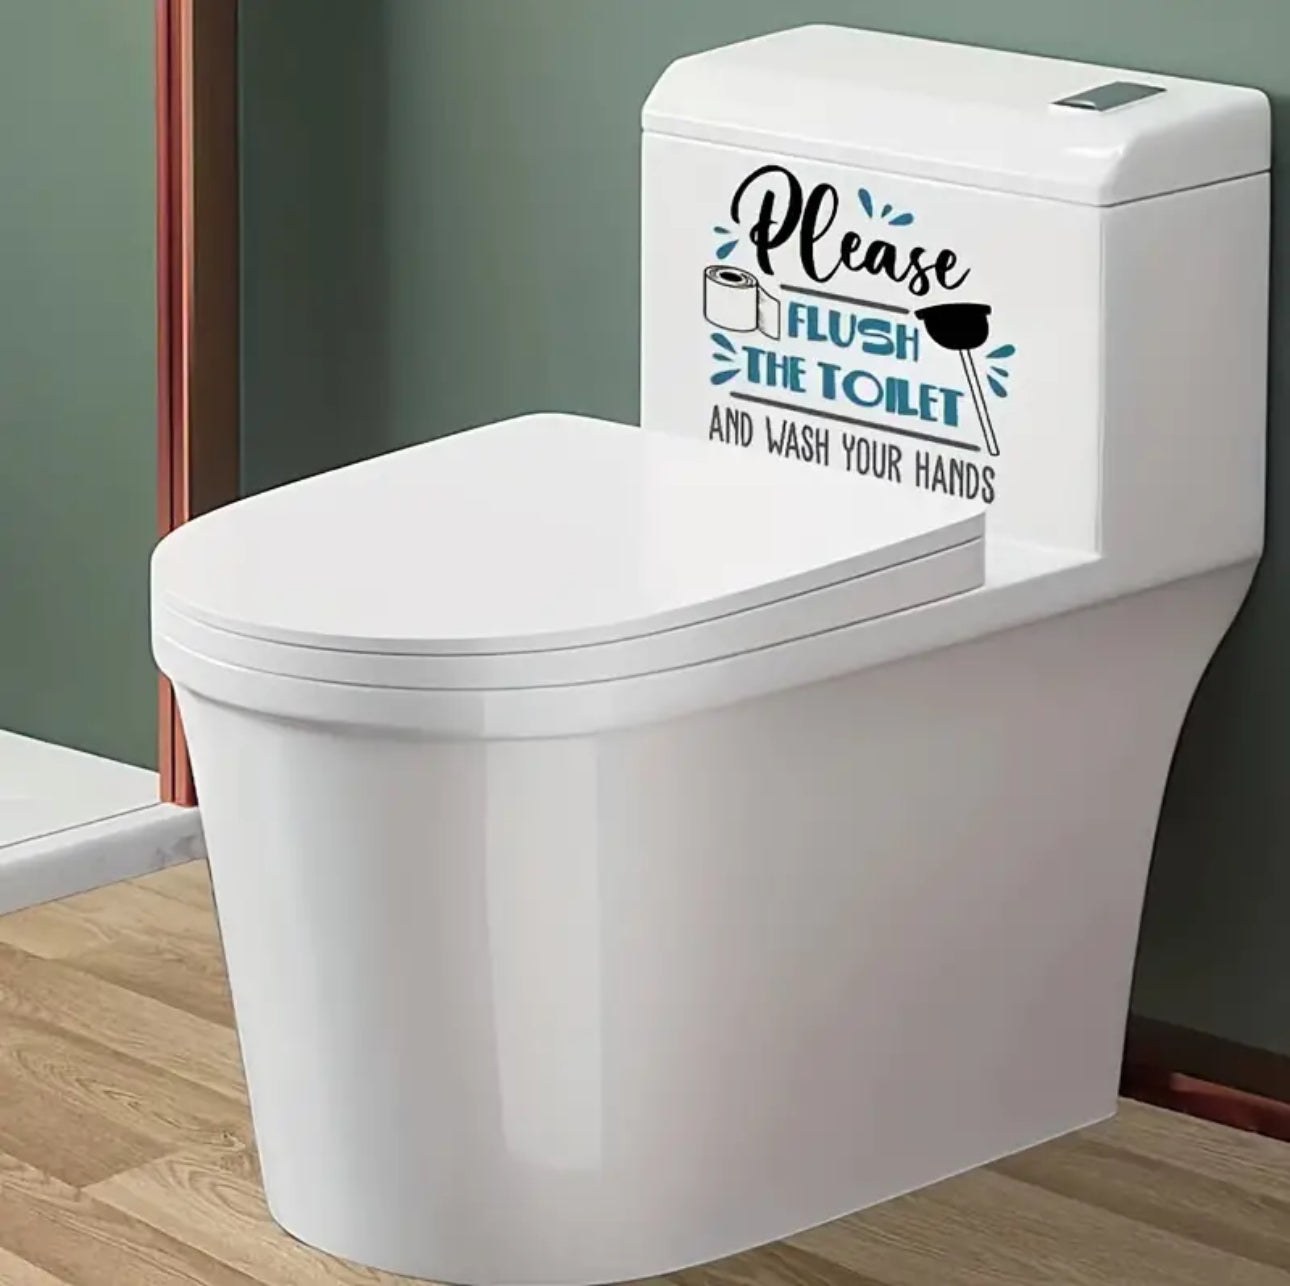 Funny Toilet Decal- Wash Your Hands and Flush